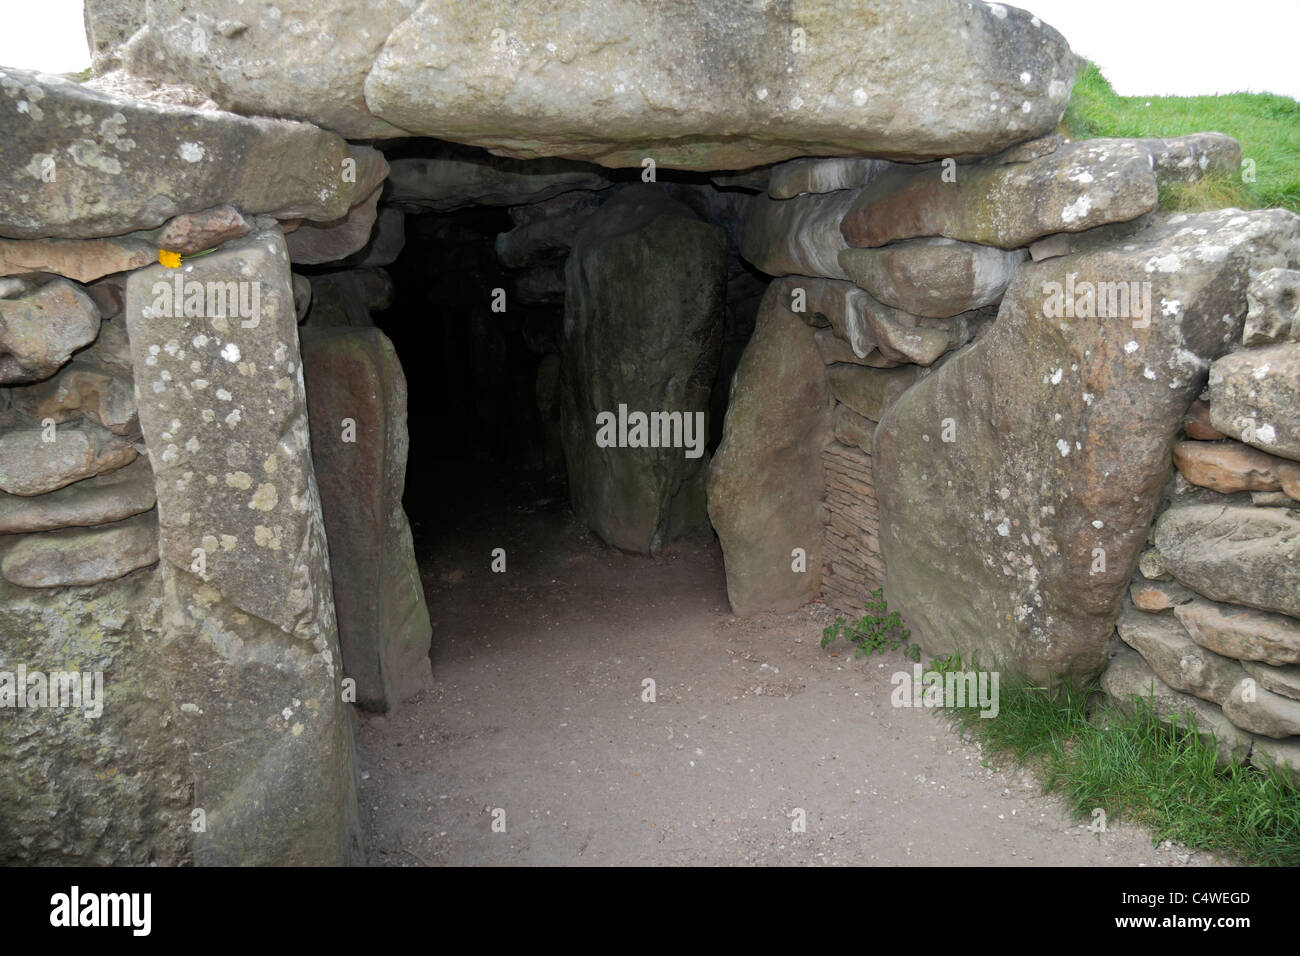 Entrance to the West Kennet Long Barrow, Neolithic chambered tombs, part of Avebury World Heritage Site, Wiltshire, UK. Stock Photo